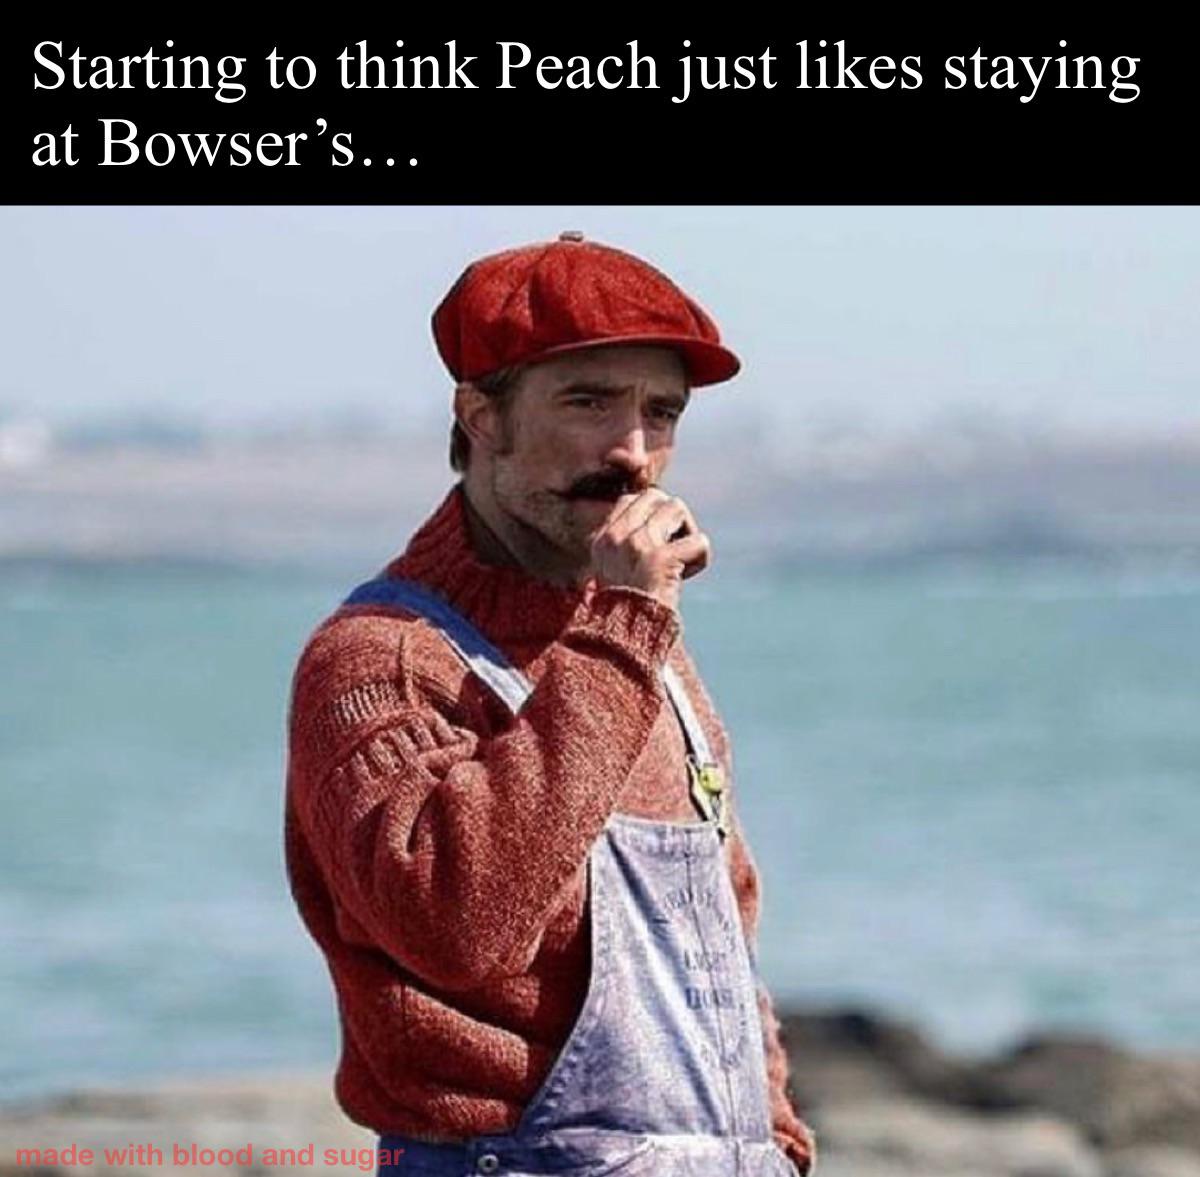 funny random pics - robert pattinson mario bros - Starting to think Peach just staying at Bowser's... made with blood and sugar 1045